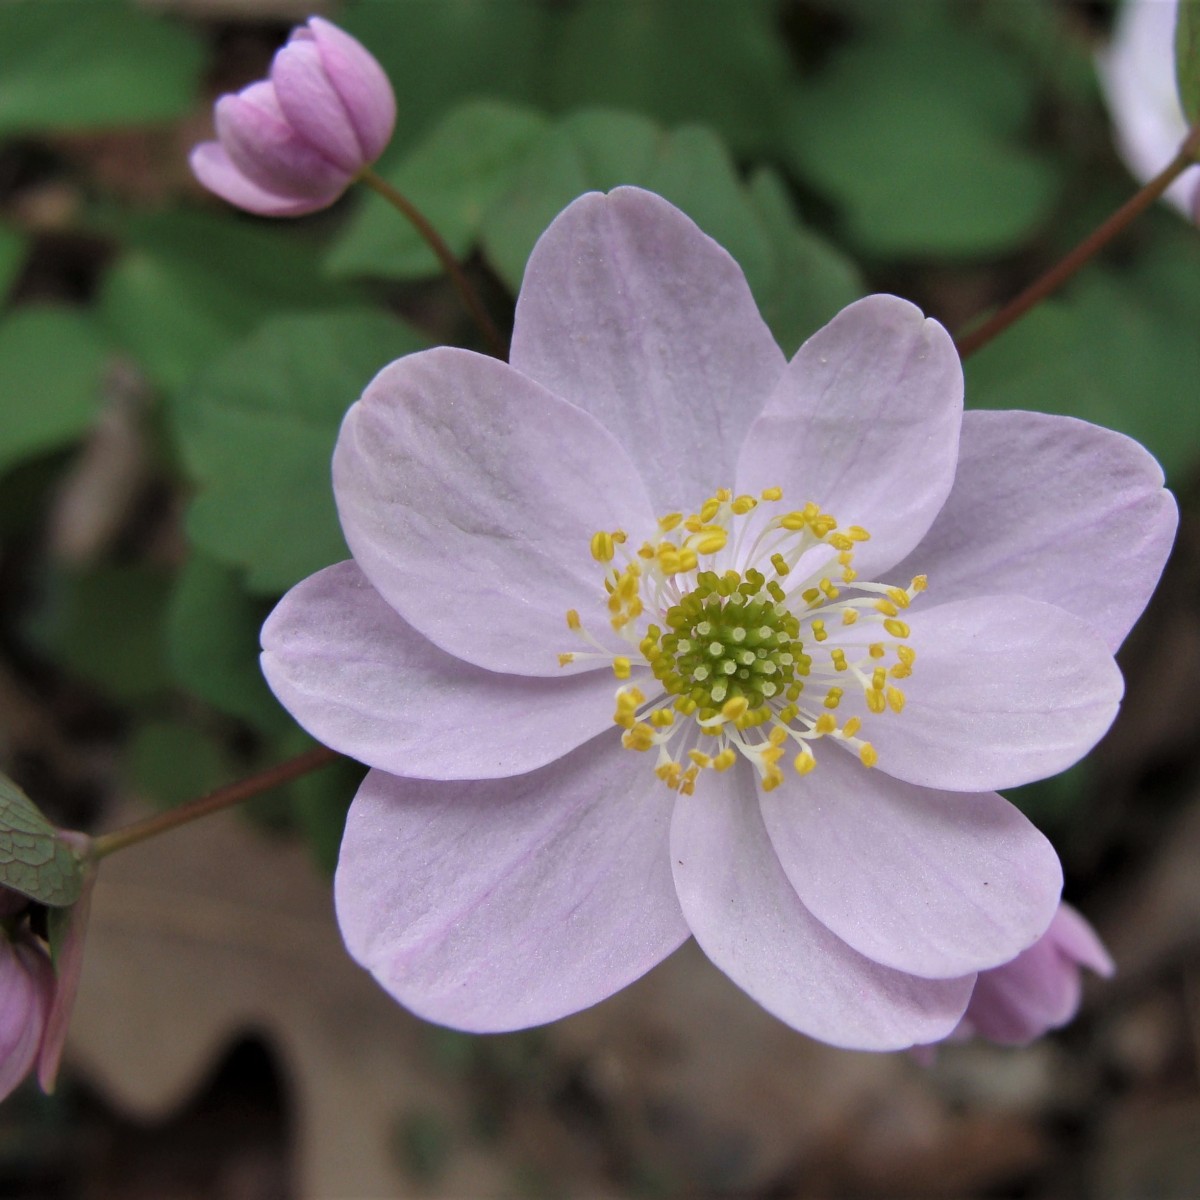 Know Your Natives – Rue-Anemone